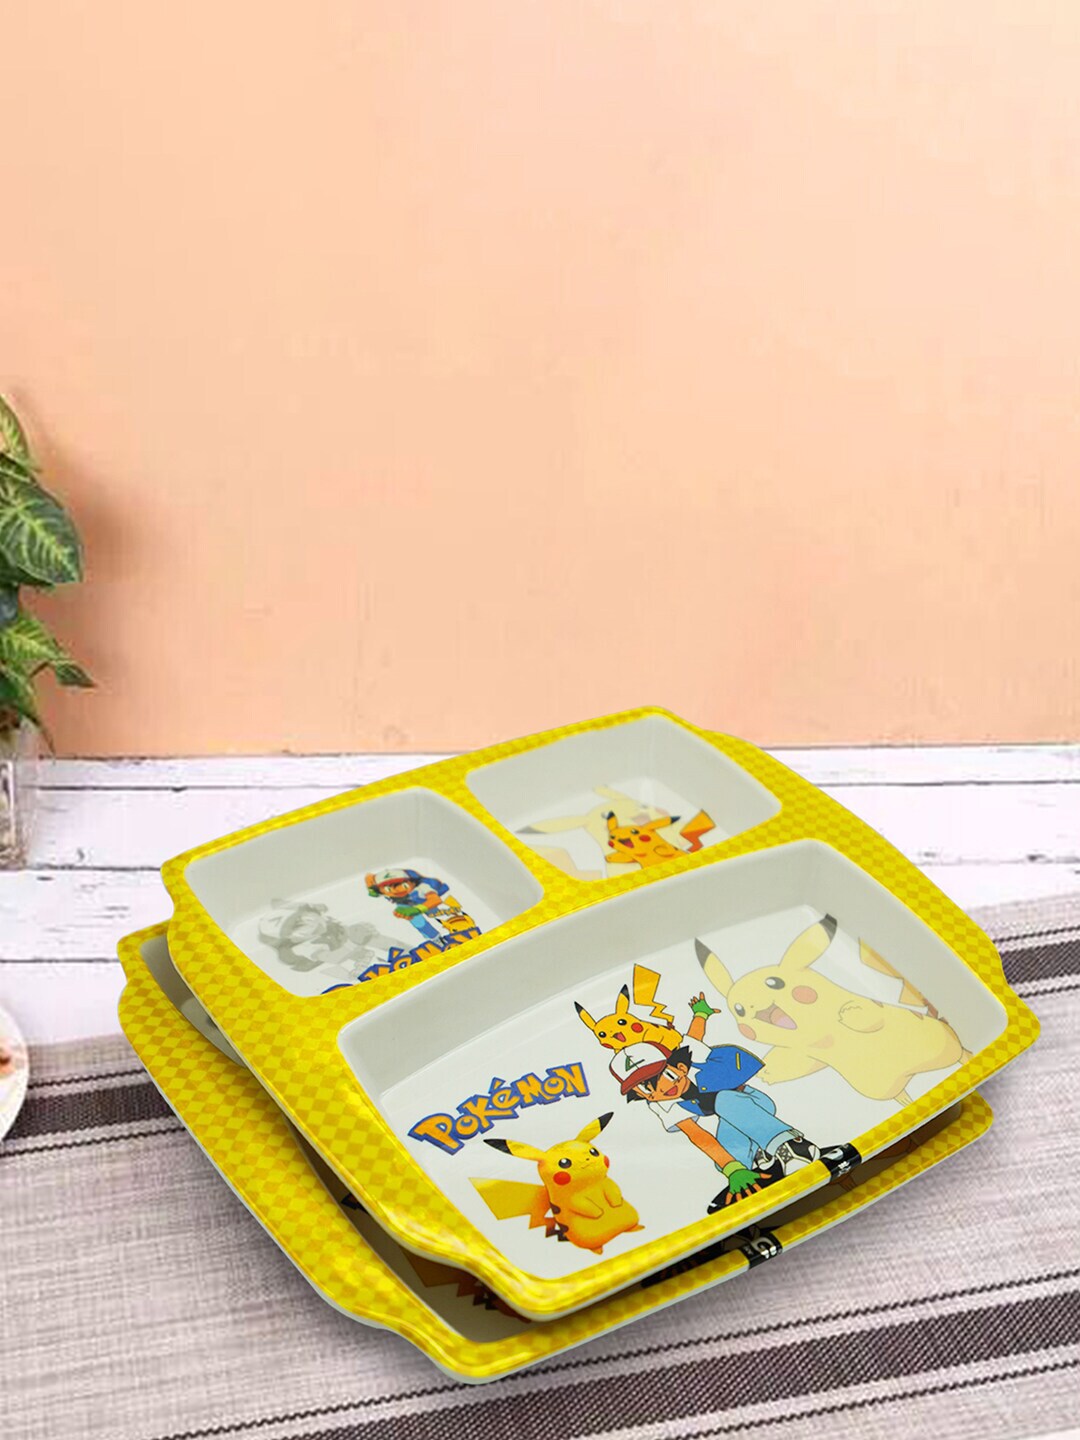 Gallery99 Yellow & Off White 2 Pieces Printed Melamine Glossy Plates Price in India